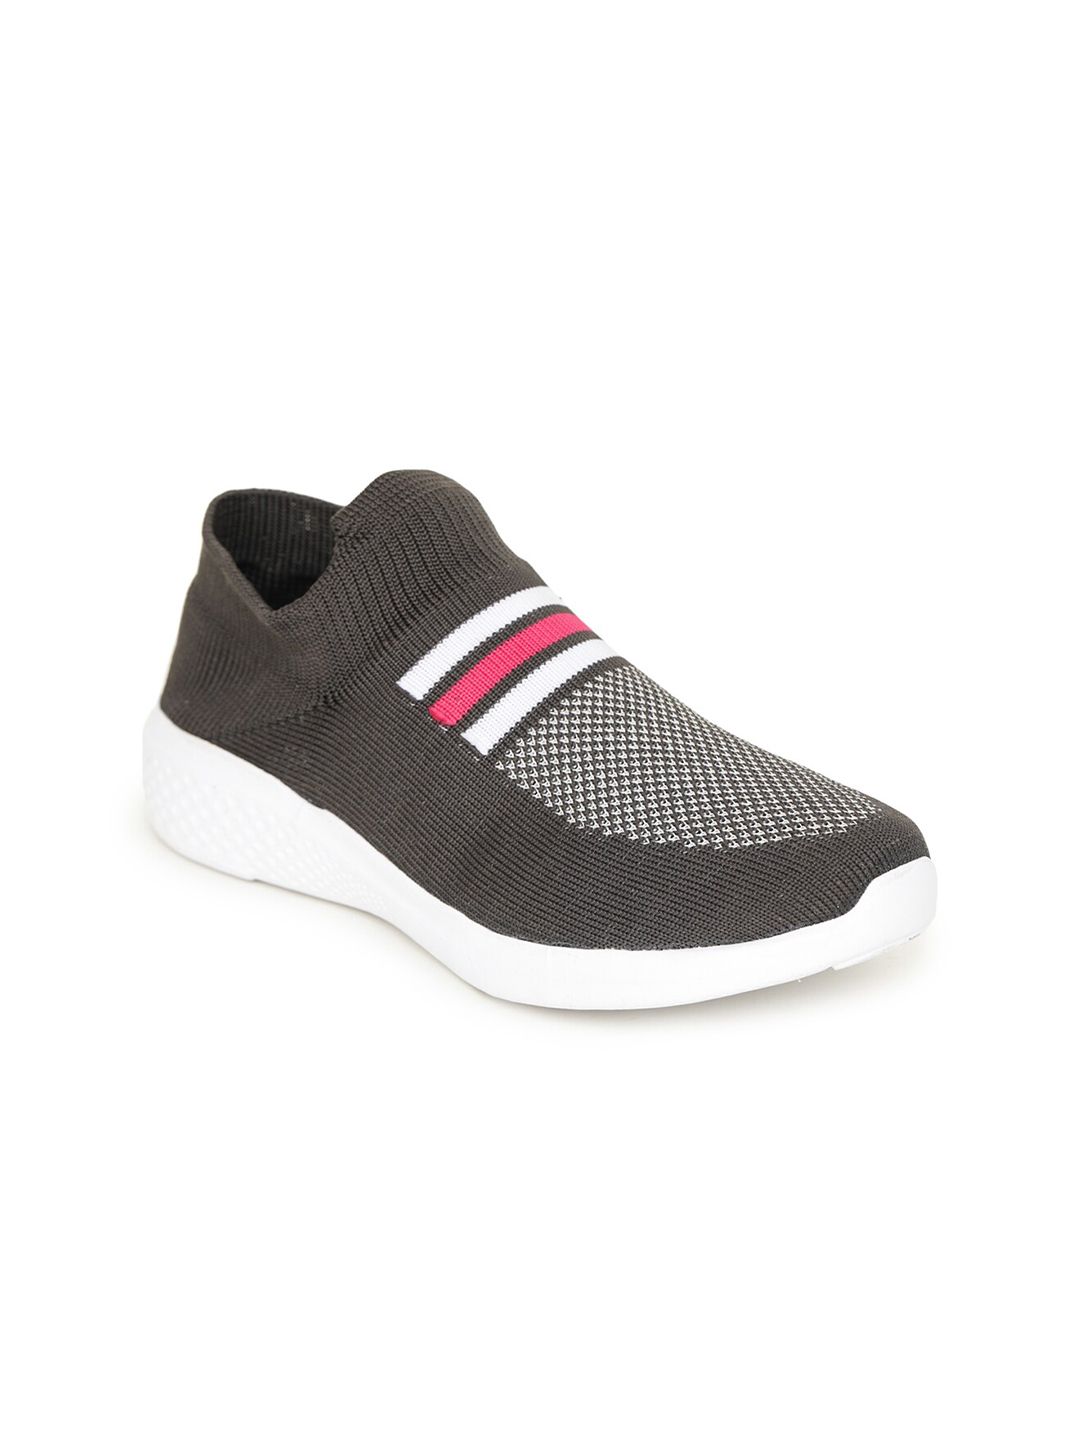 TRASE Women Grey Textile Running Shoes Price in India